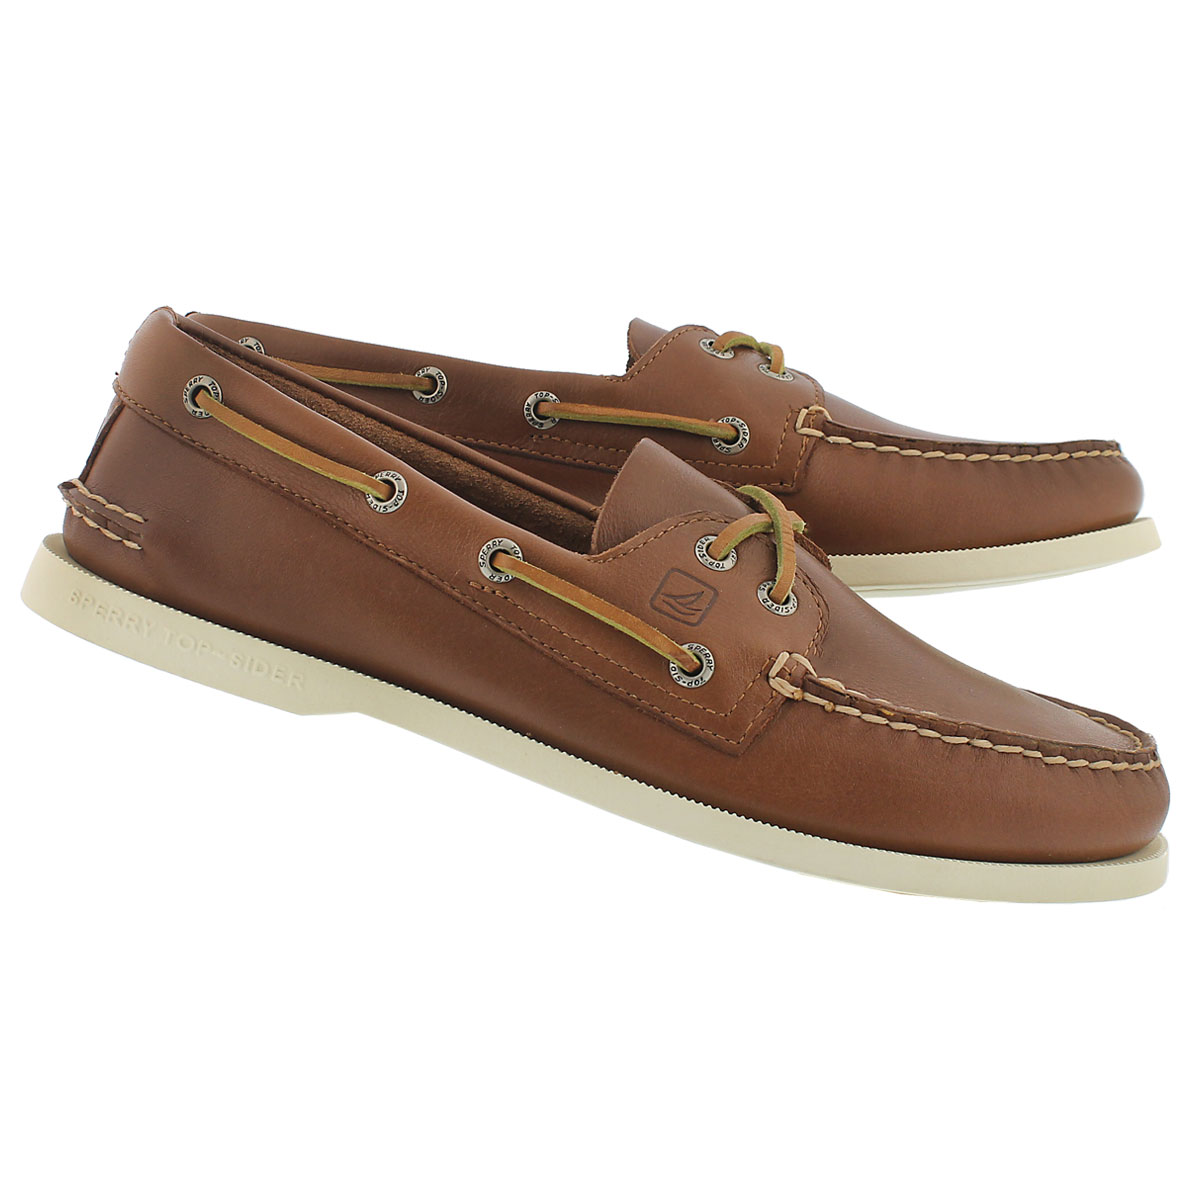 Sperry Top-Sider Men's Authentic Original 2-Eye Leather Boat Shoe | eBay